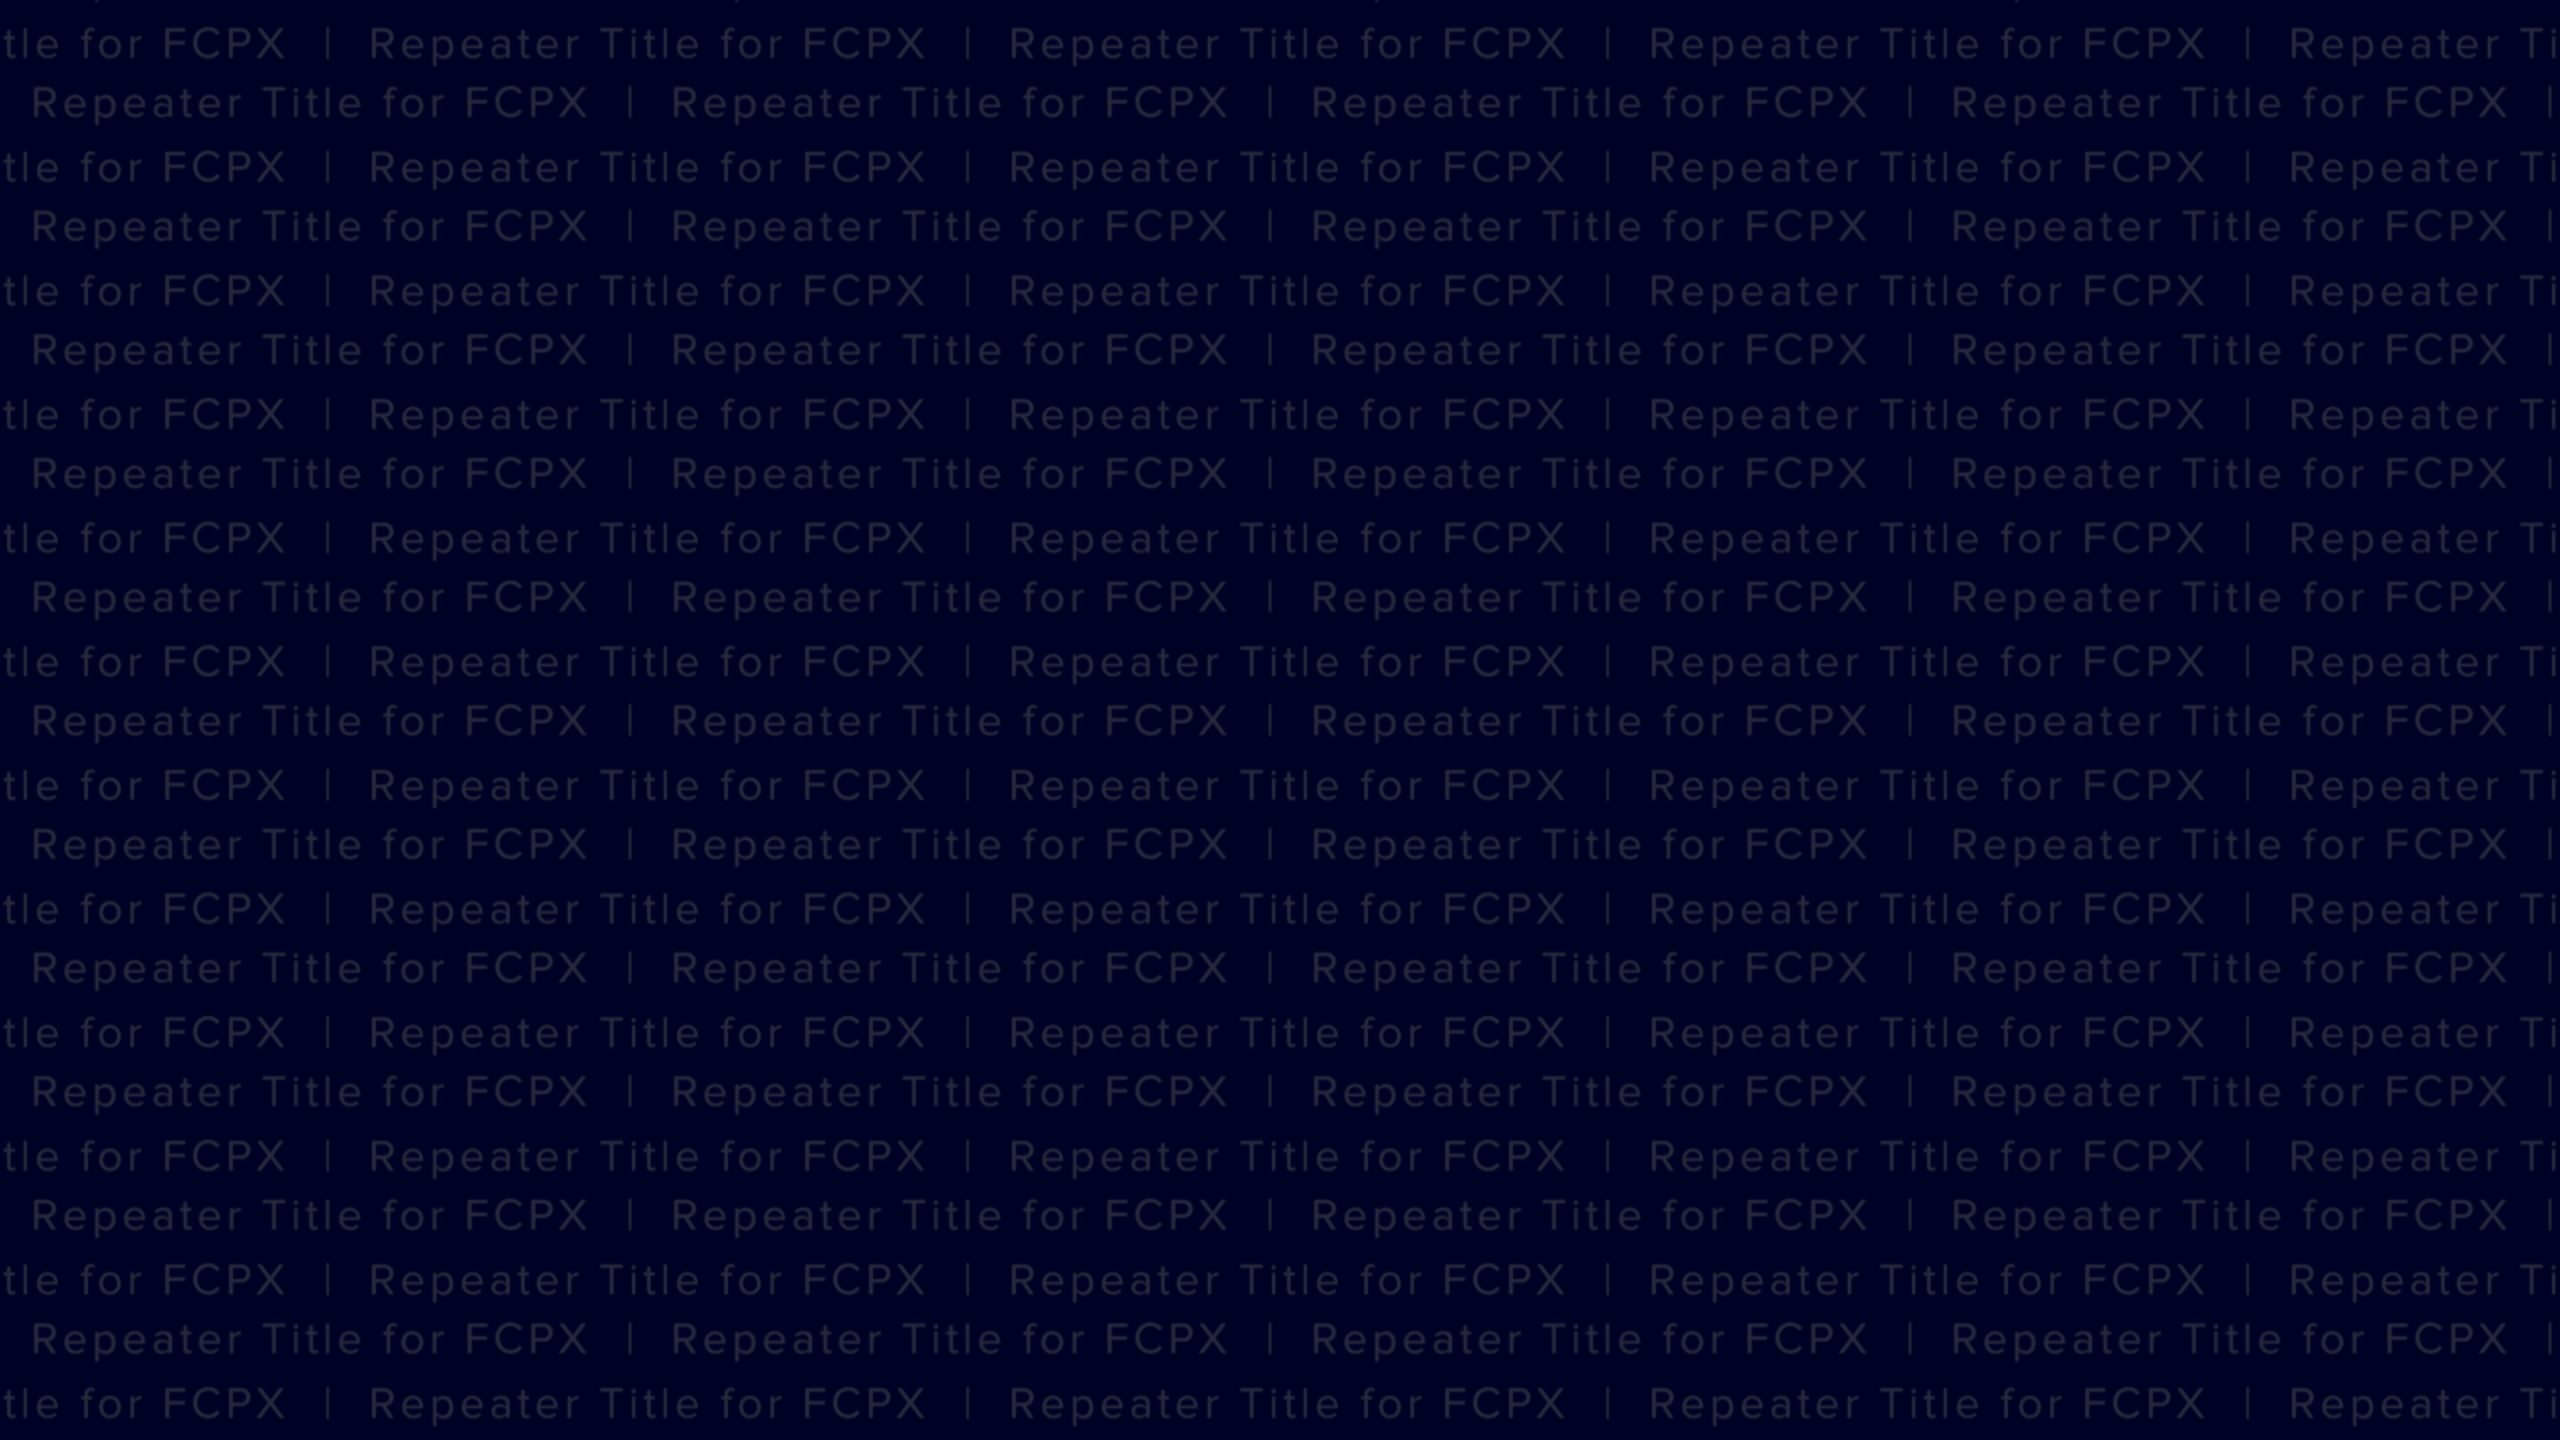 Repeater Title for FCPX